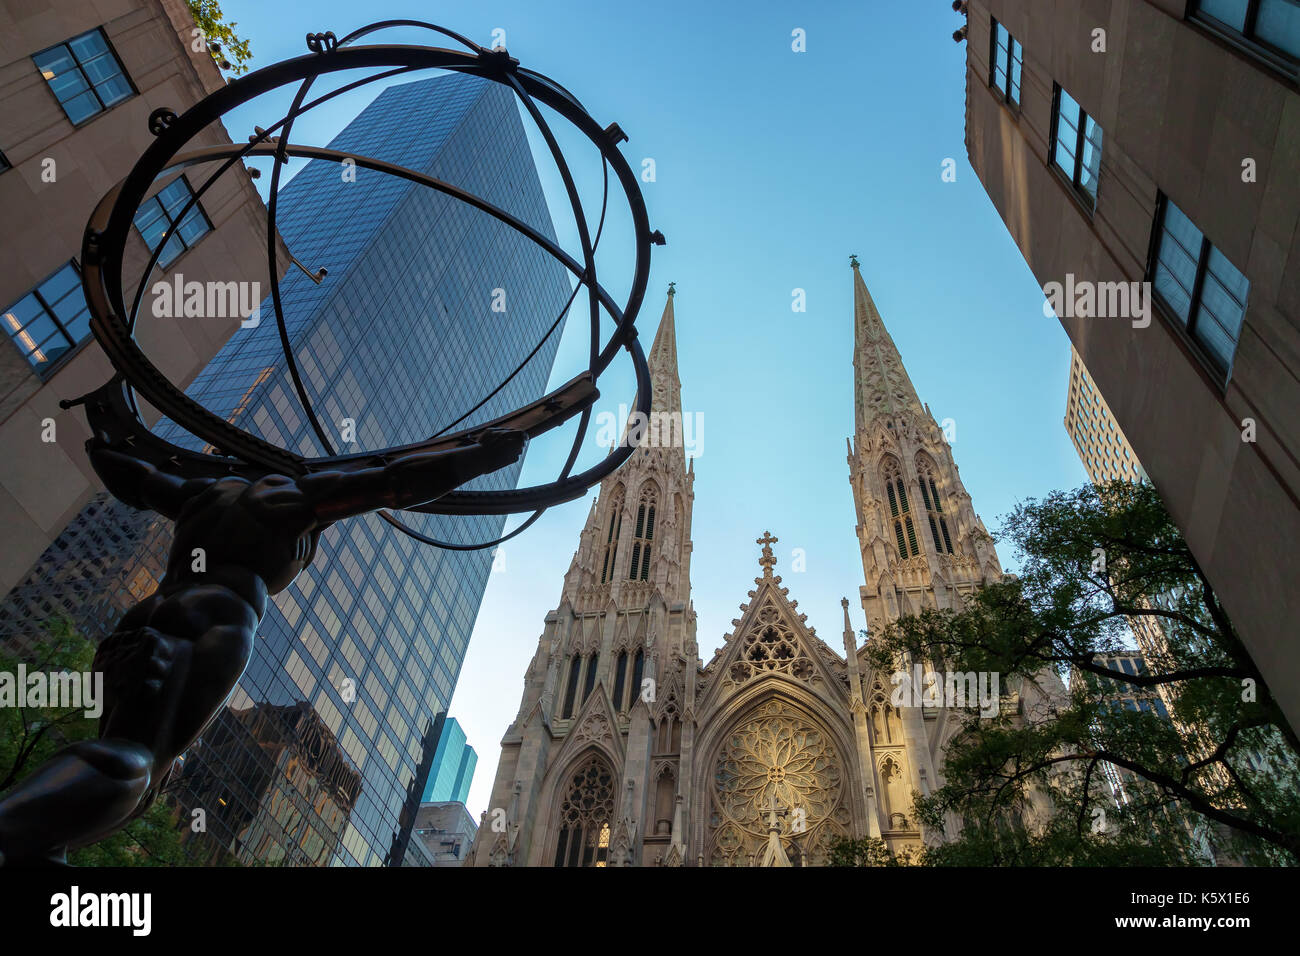 The Atlas sculpture at the Rockefeller Building with the Saint Patrick Cathedral in the background, New York City, New York. Stock Photo